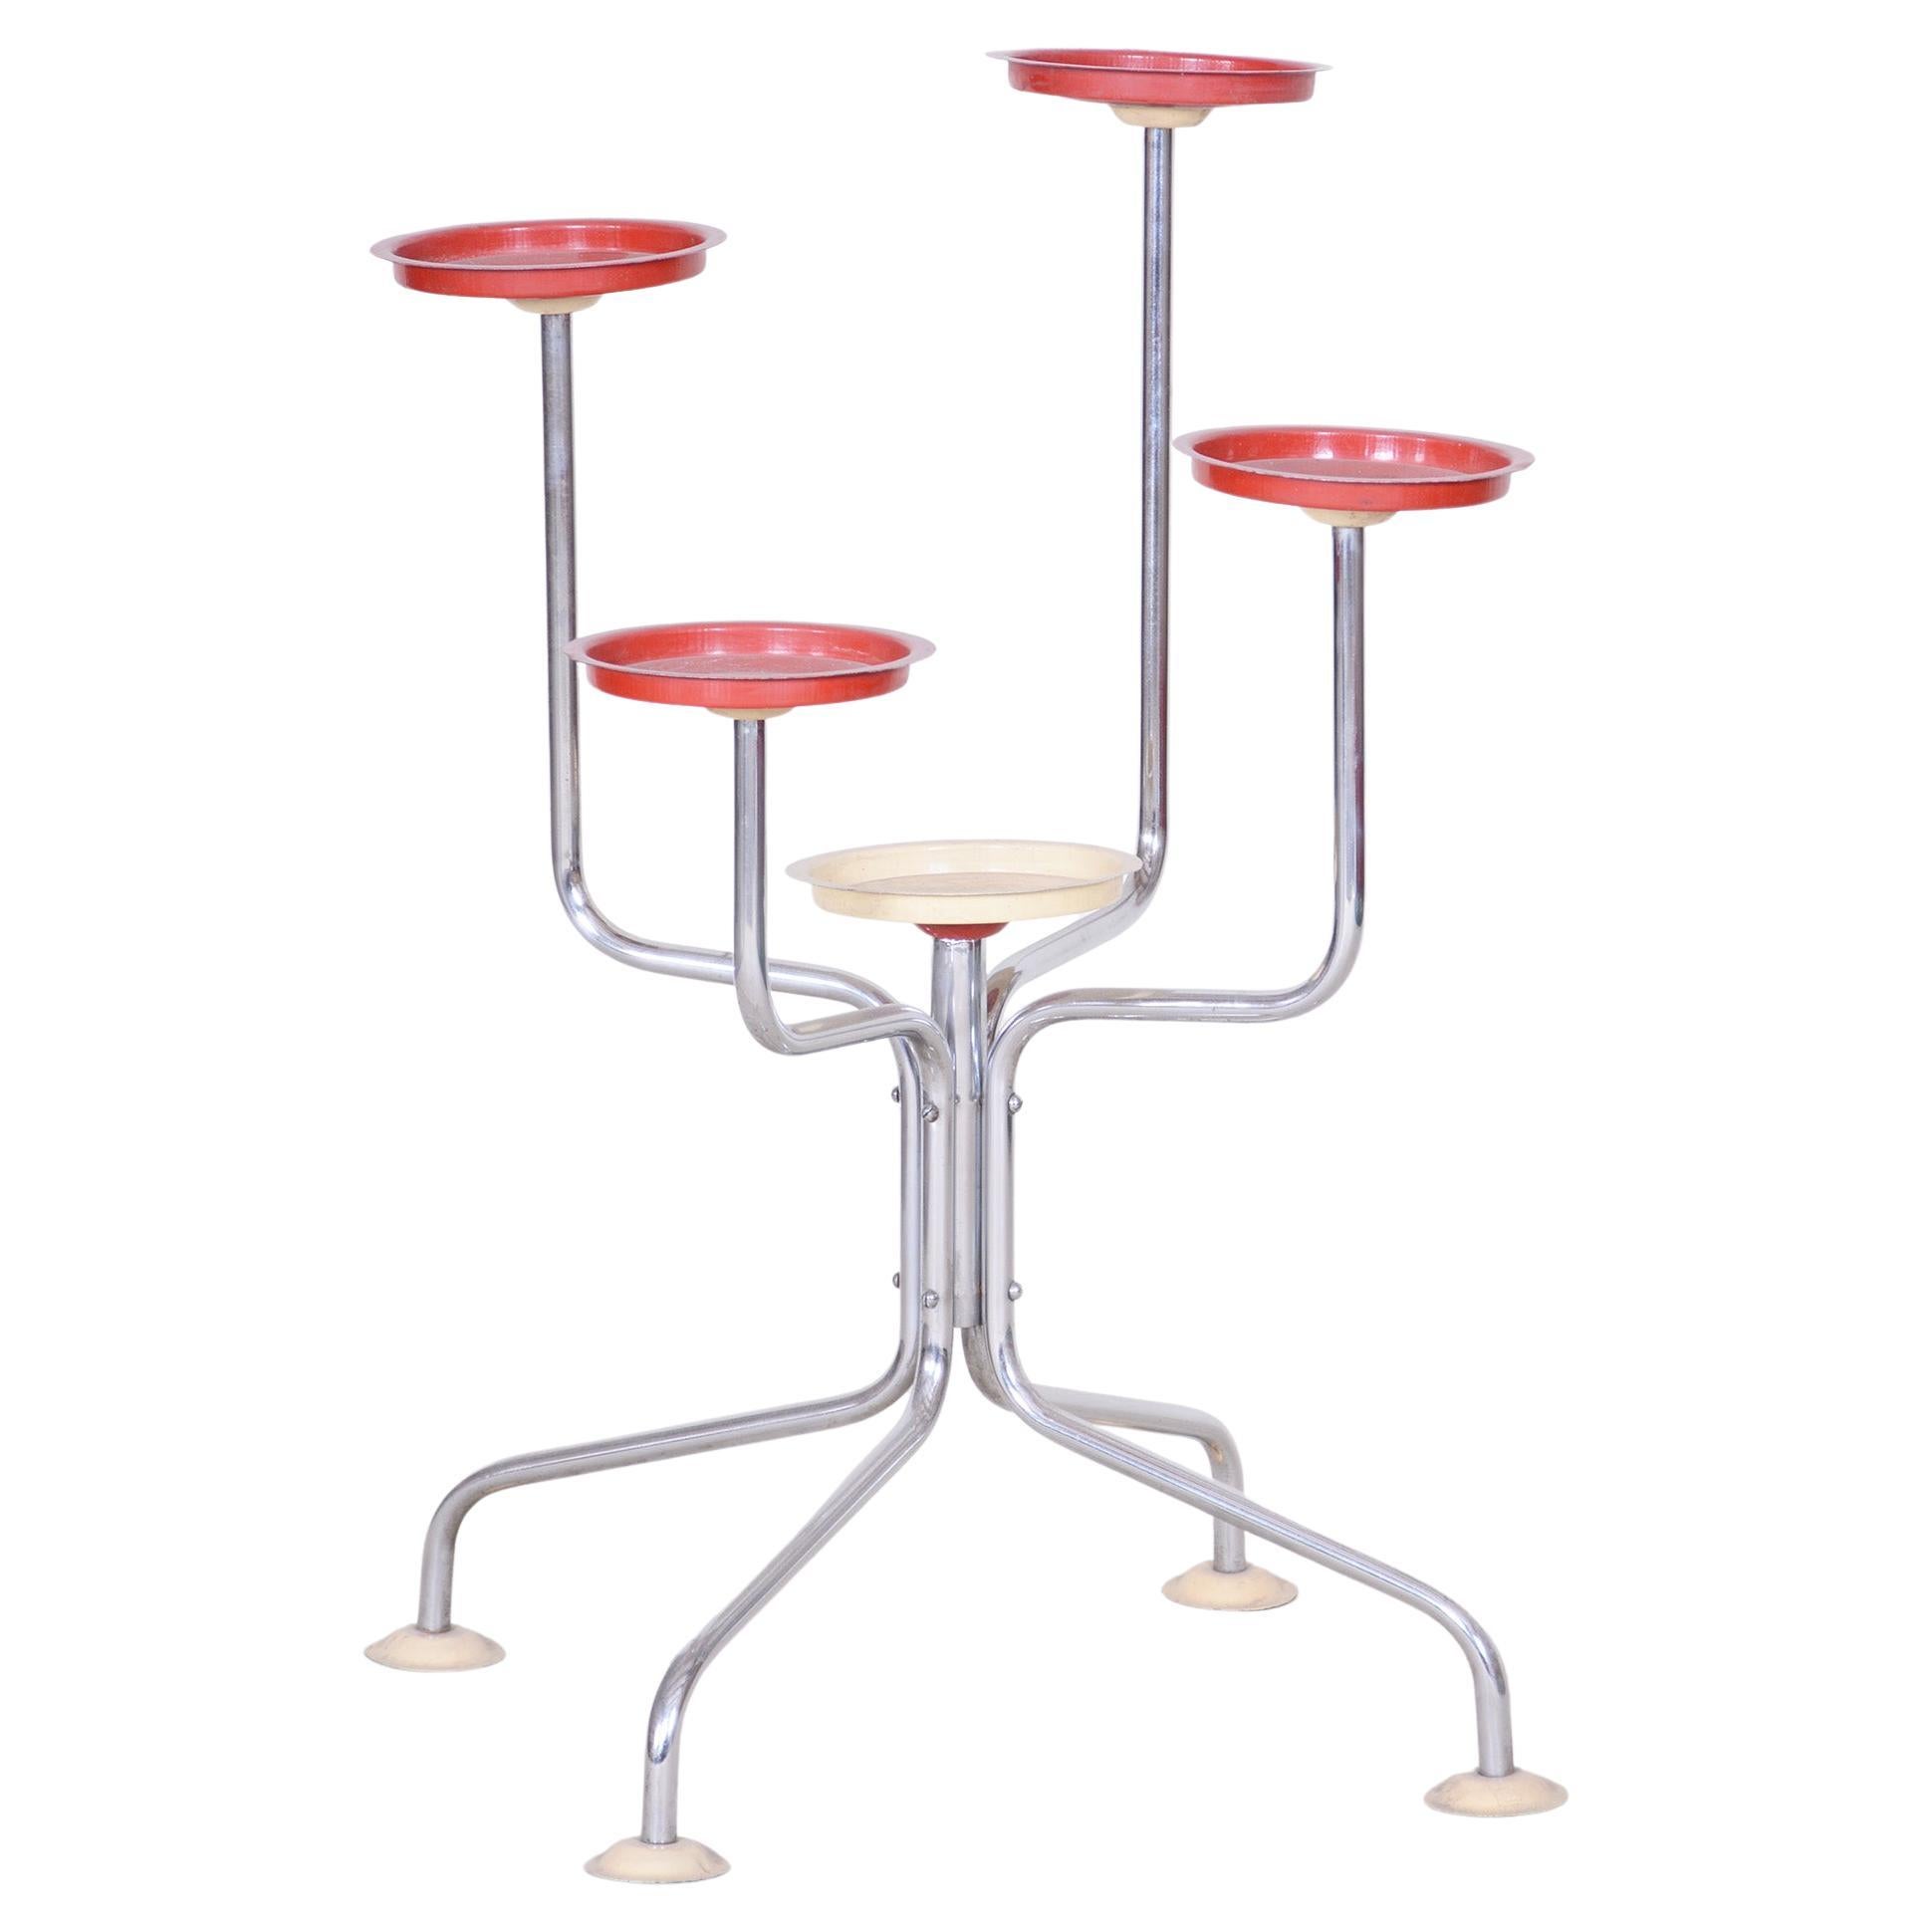 Czech Bauhaus Flower Stand Made of Chrome Plated Steel, Stable, 1930s For Sale